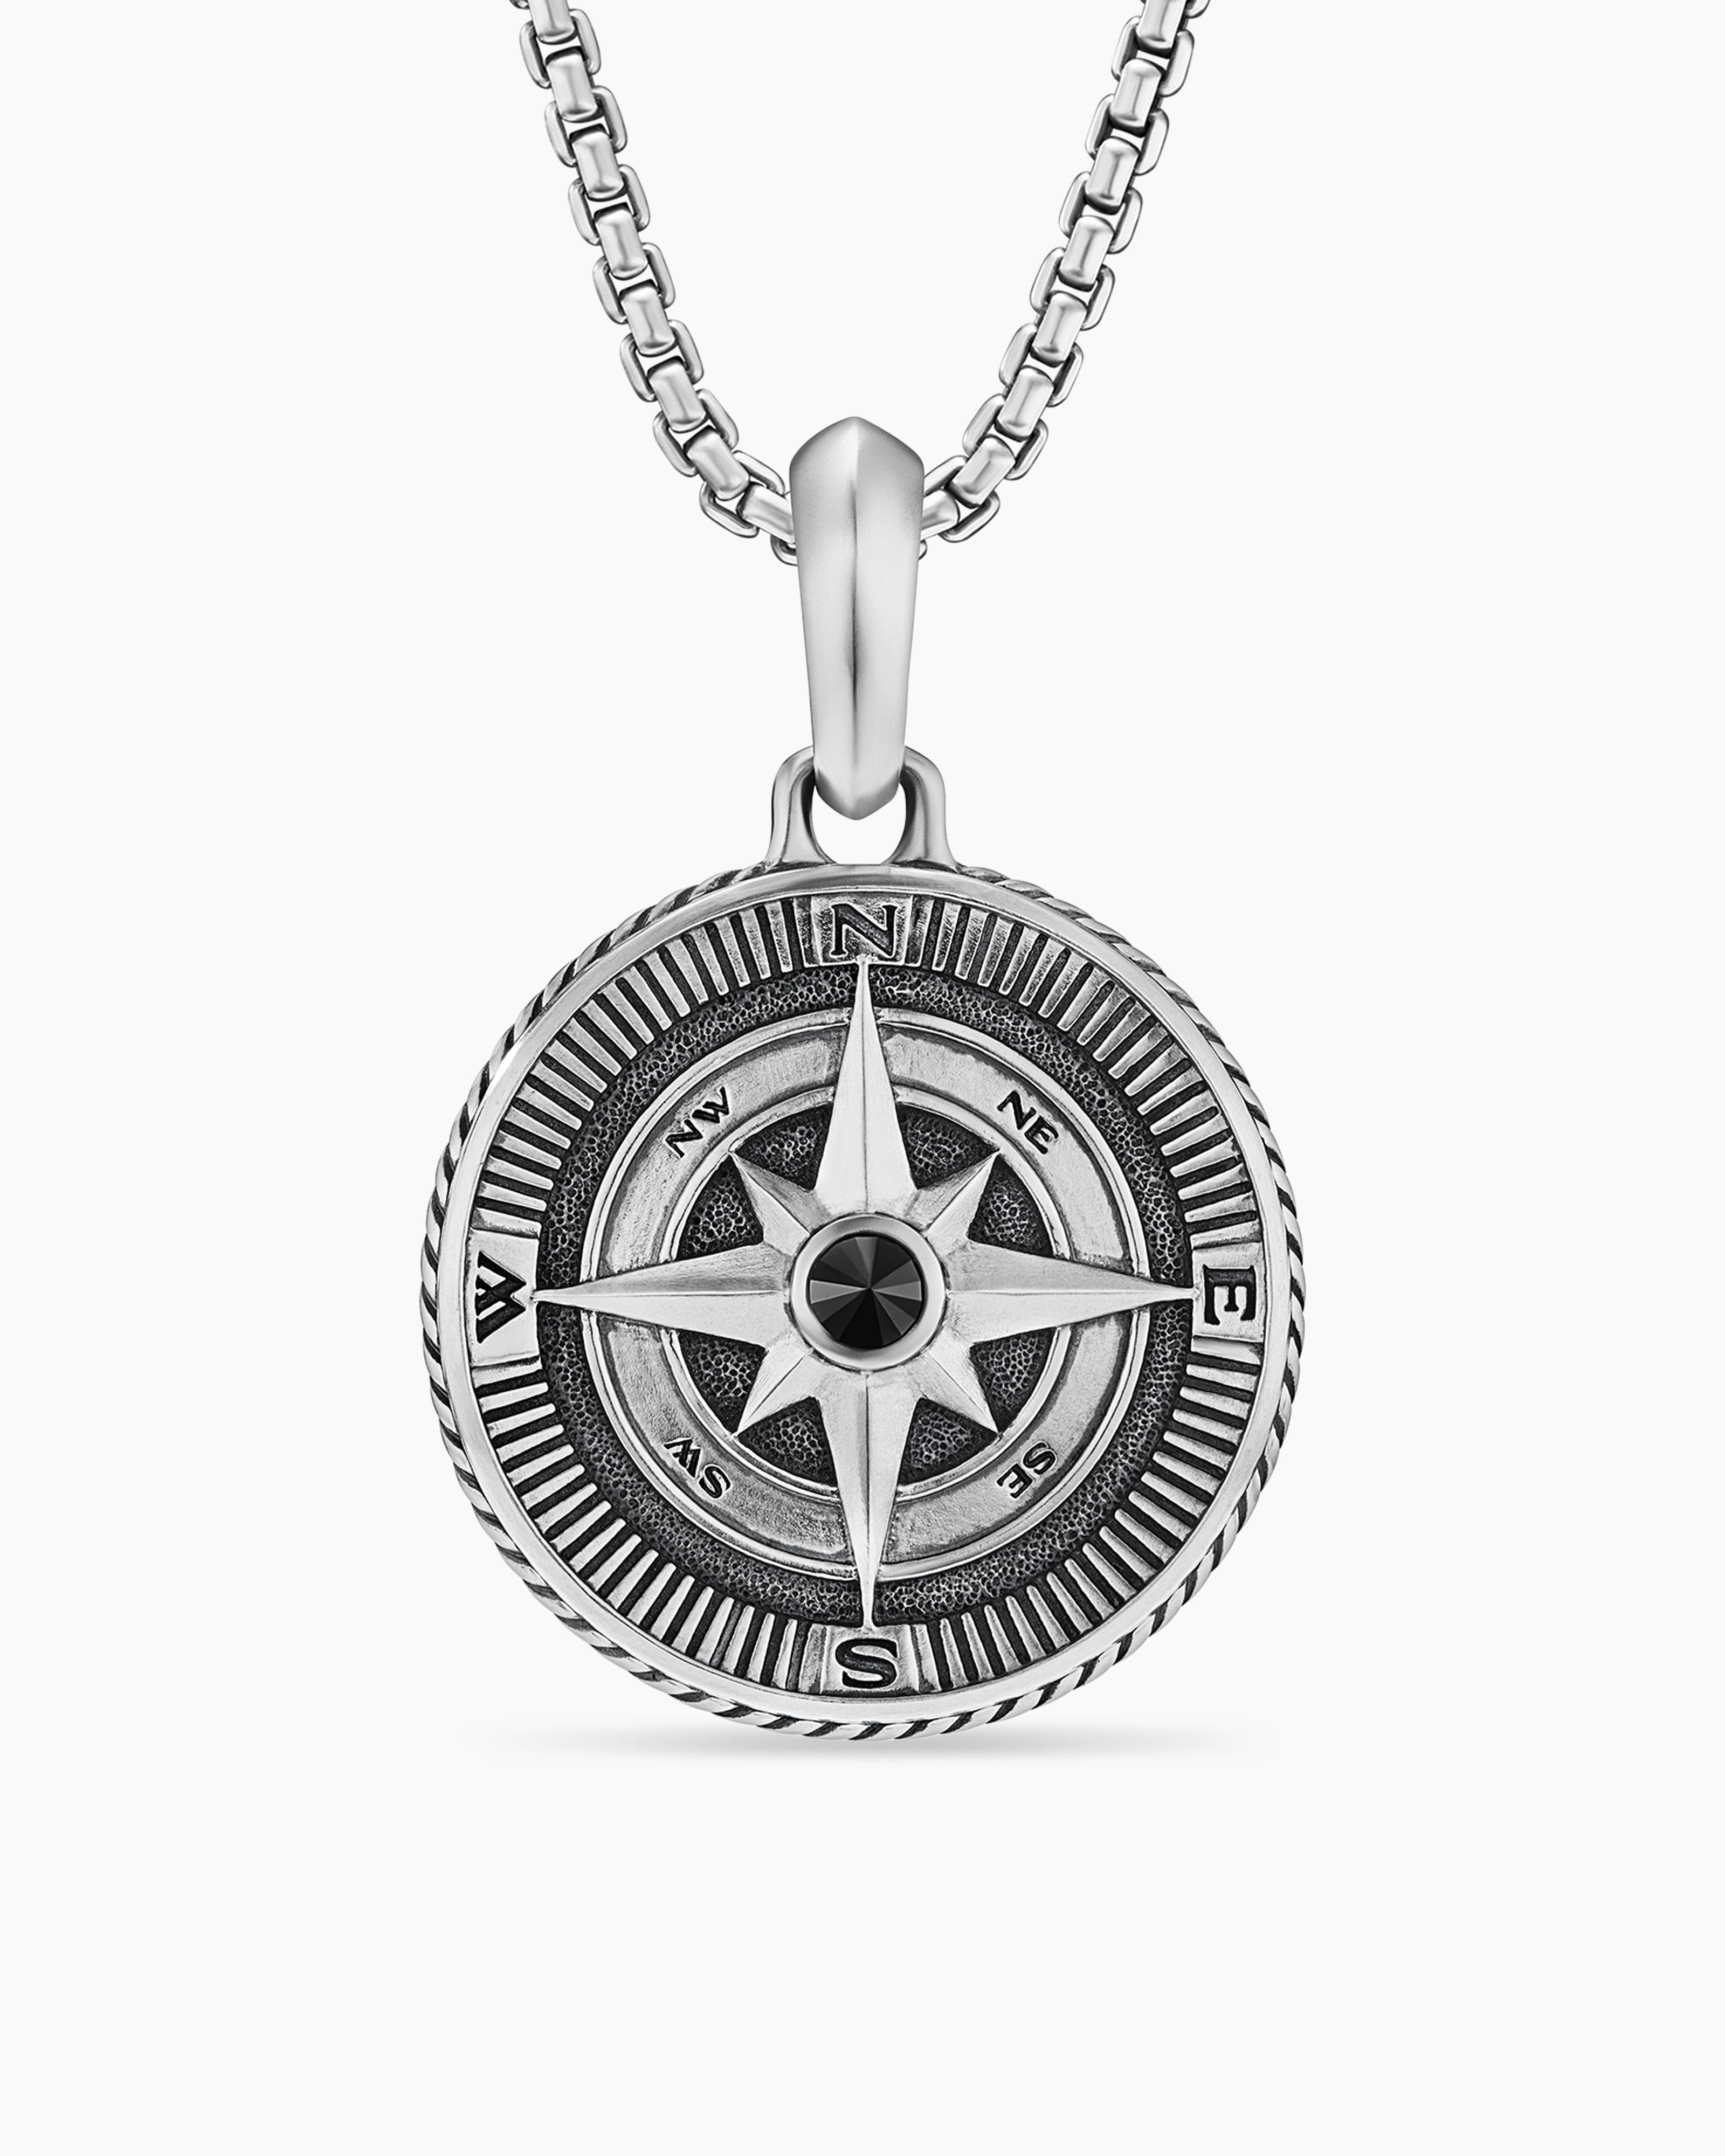 Compass Rose Pendant Necklace 001-165-02332 14KY | Hingham Jewelers |  Hingham, MA